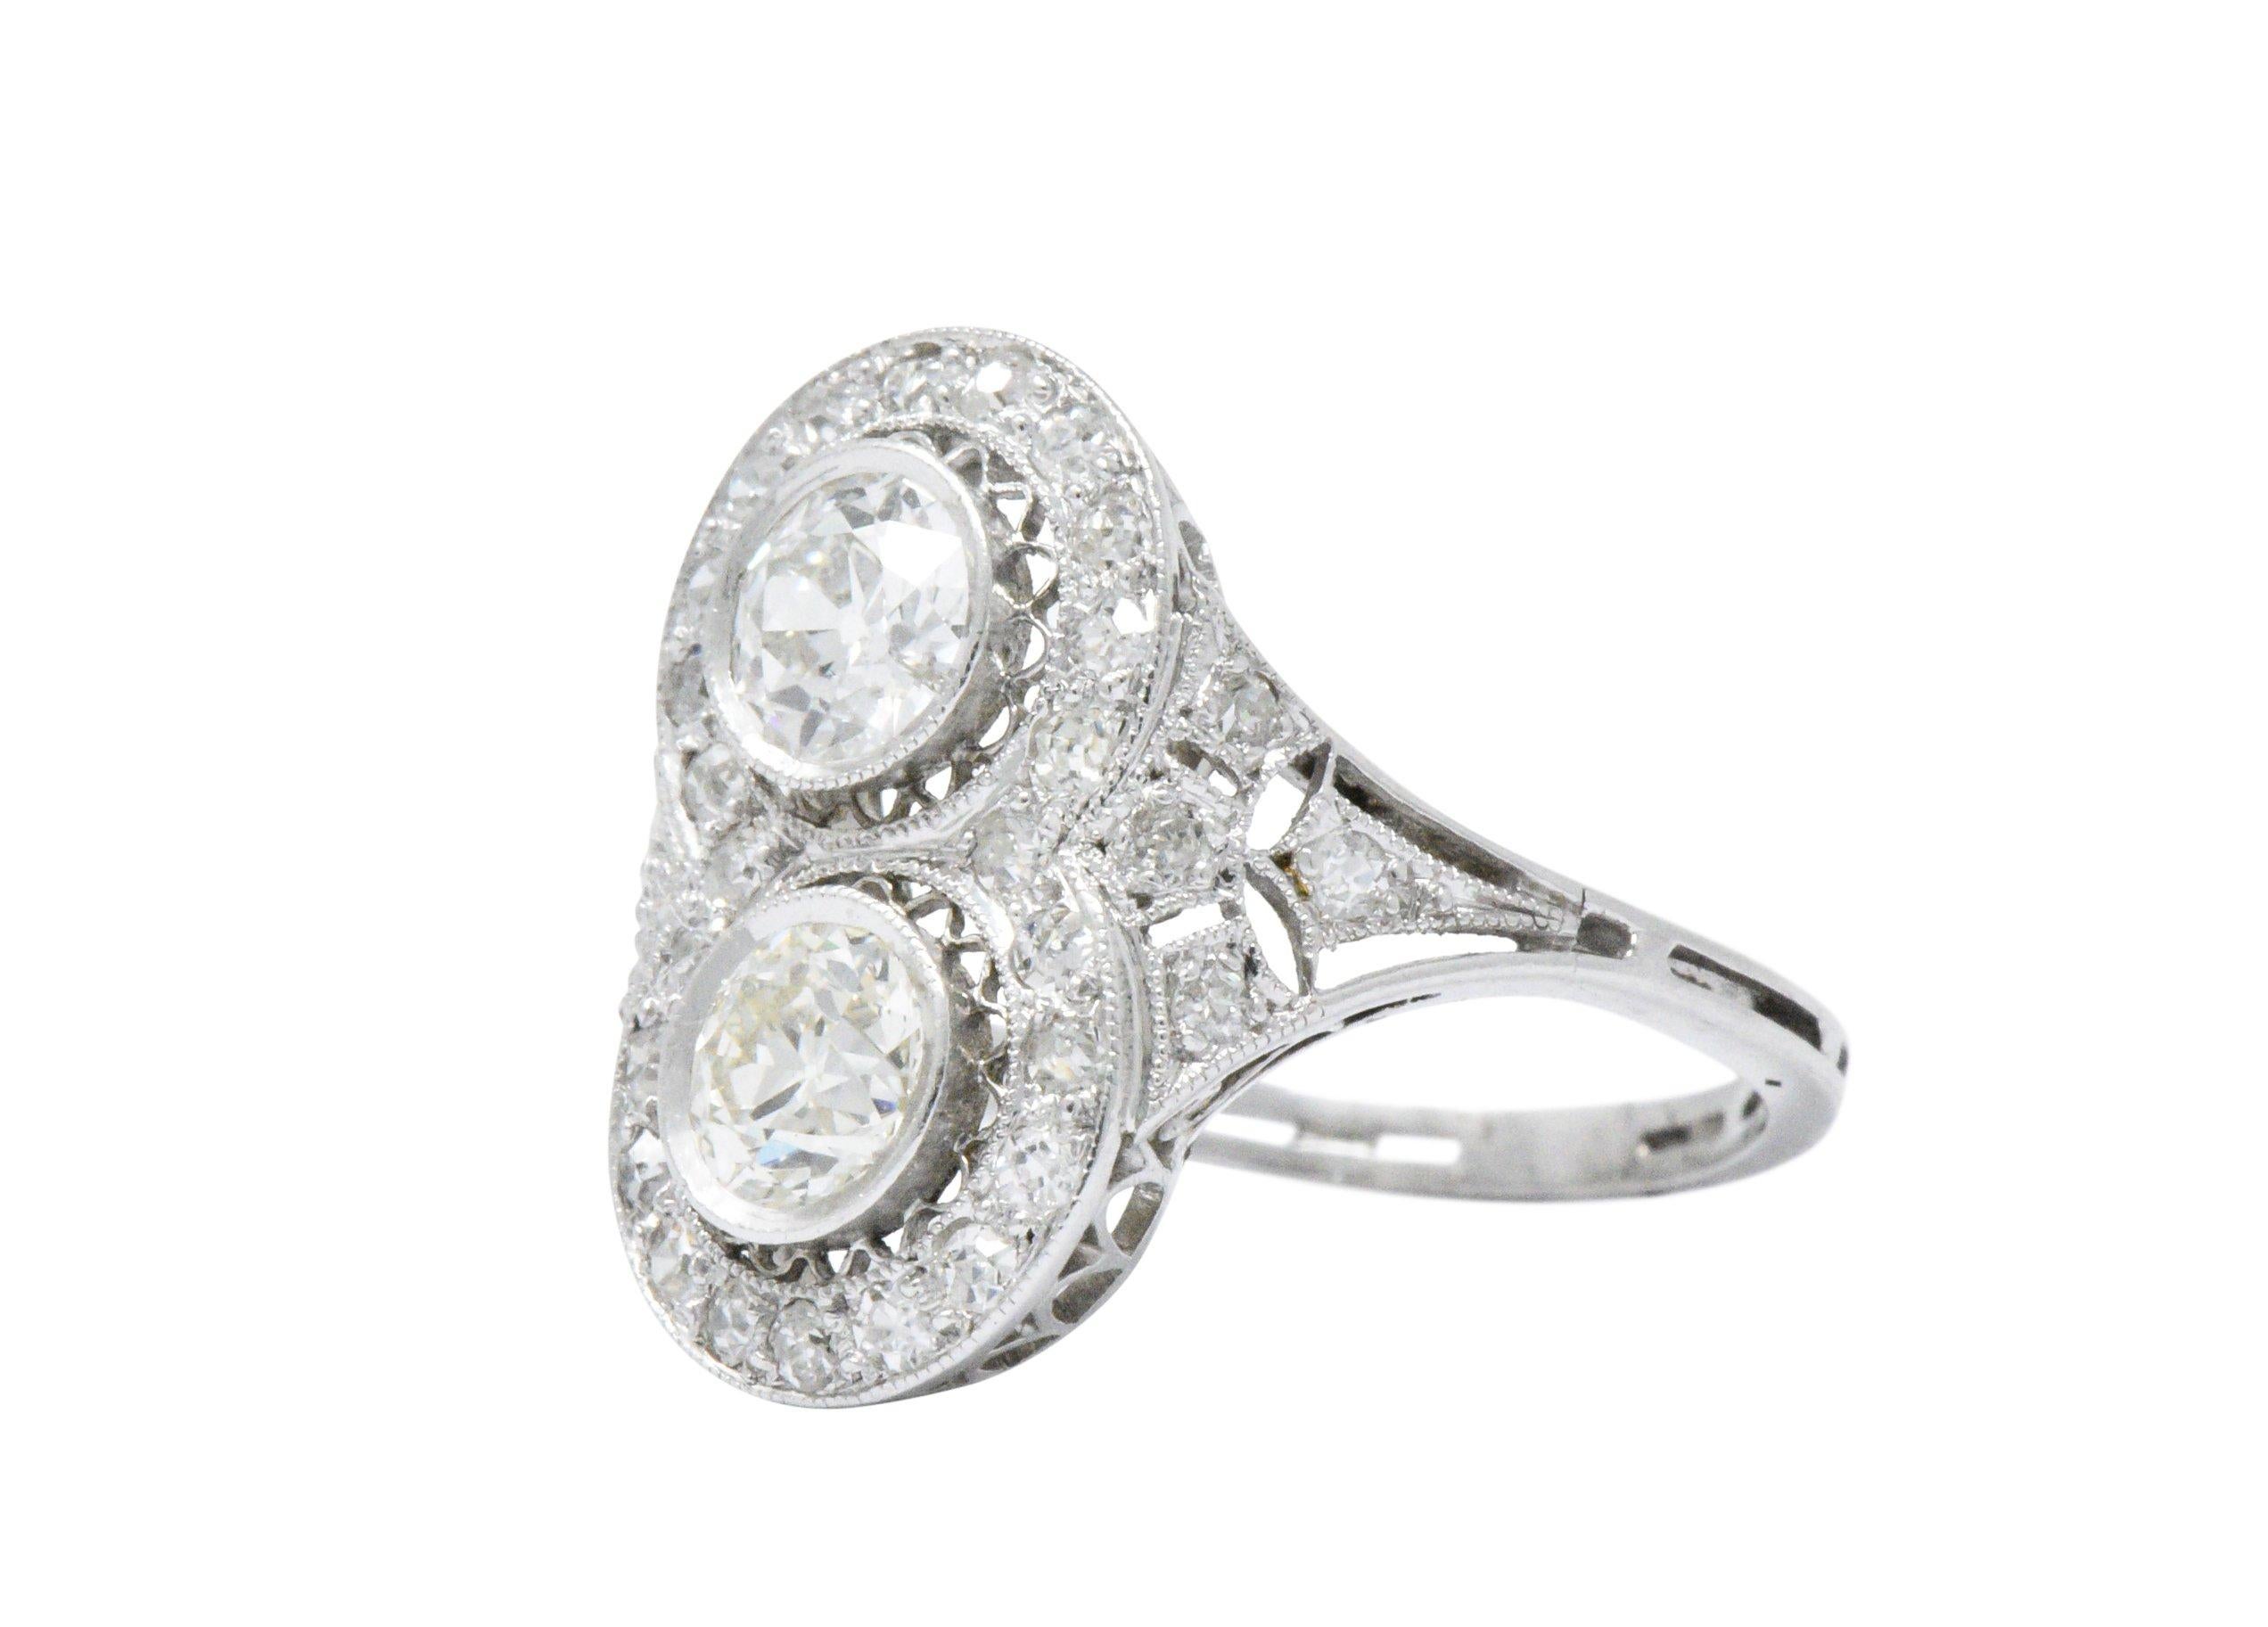 Platinum Edwardian Toi et Moi (French for you and me) ring 

Centering 2 old European cut diamonds, H/J Color, VS to SI clarity, approximately 1.00 CTW

Accented by clean old mine and single cut diamonds weighing 0.54 CTW  

Top measures 18.40 mm